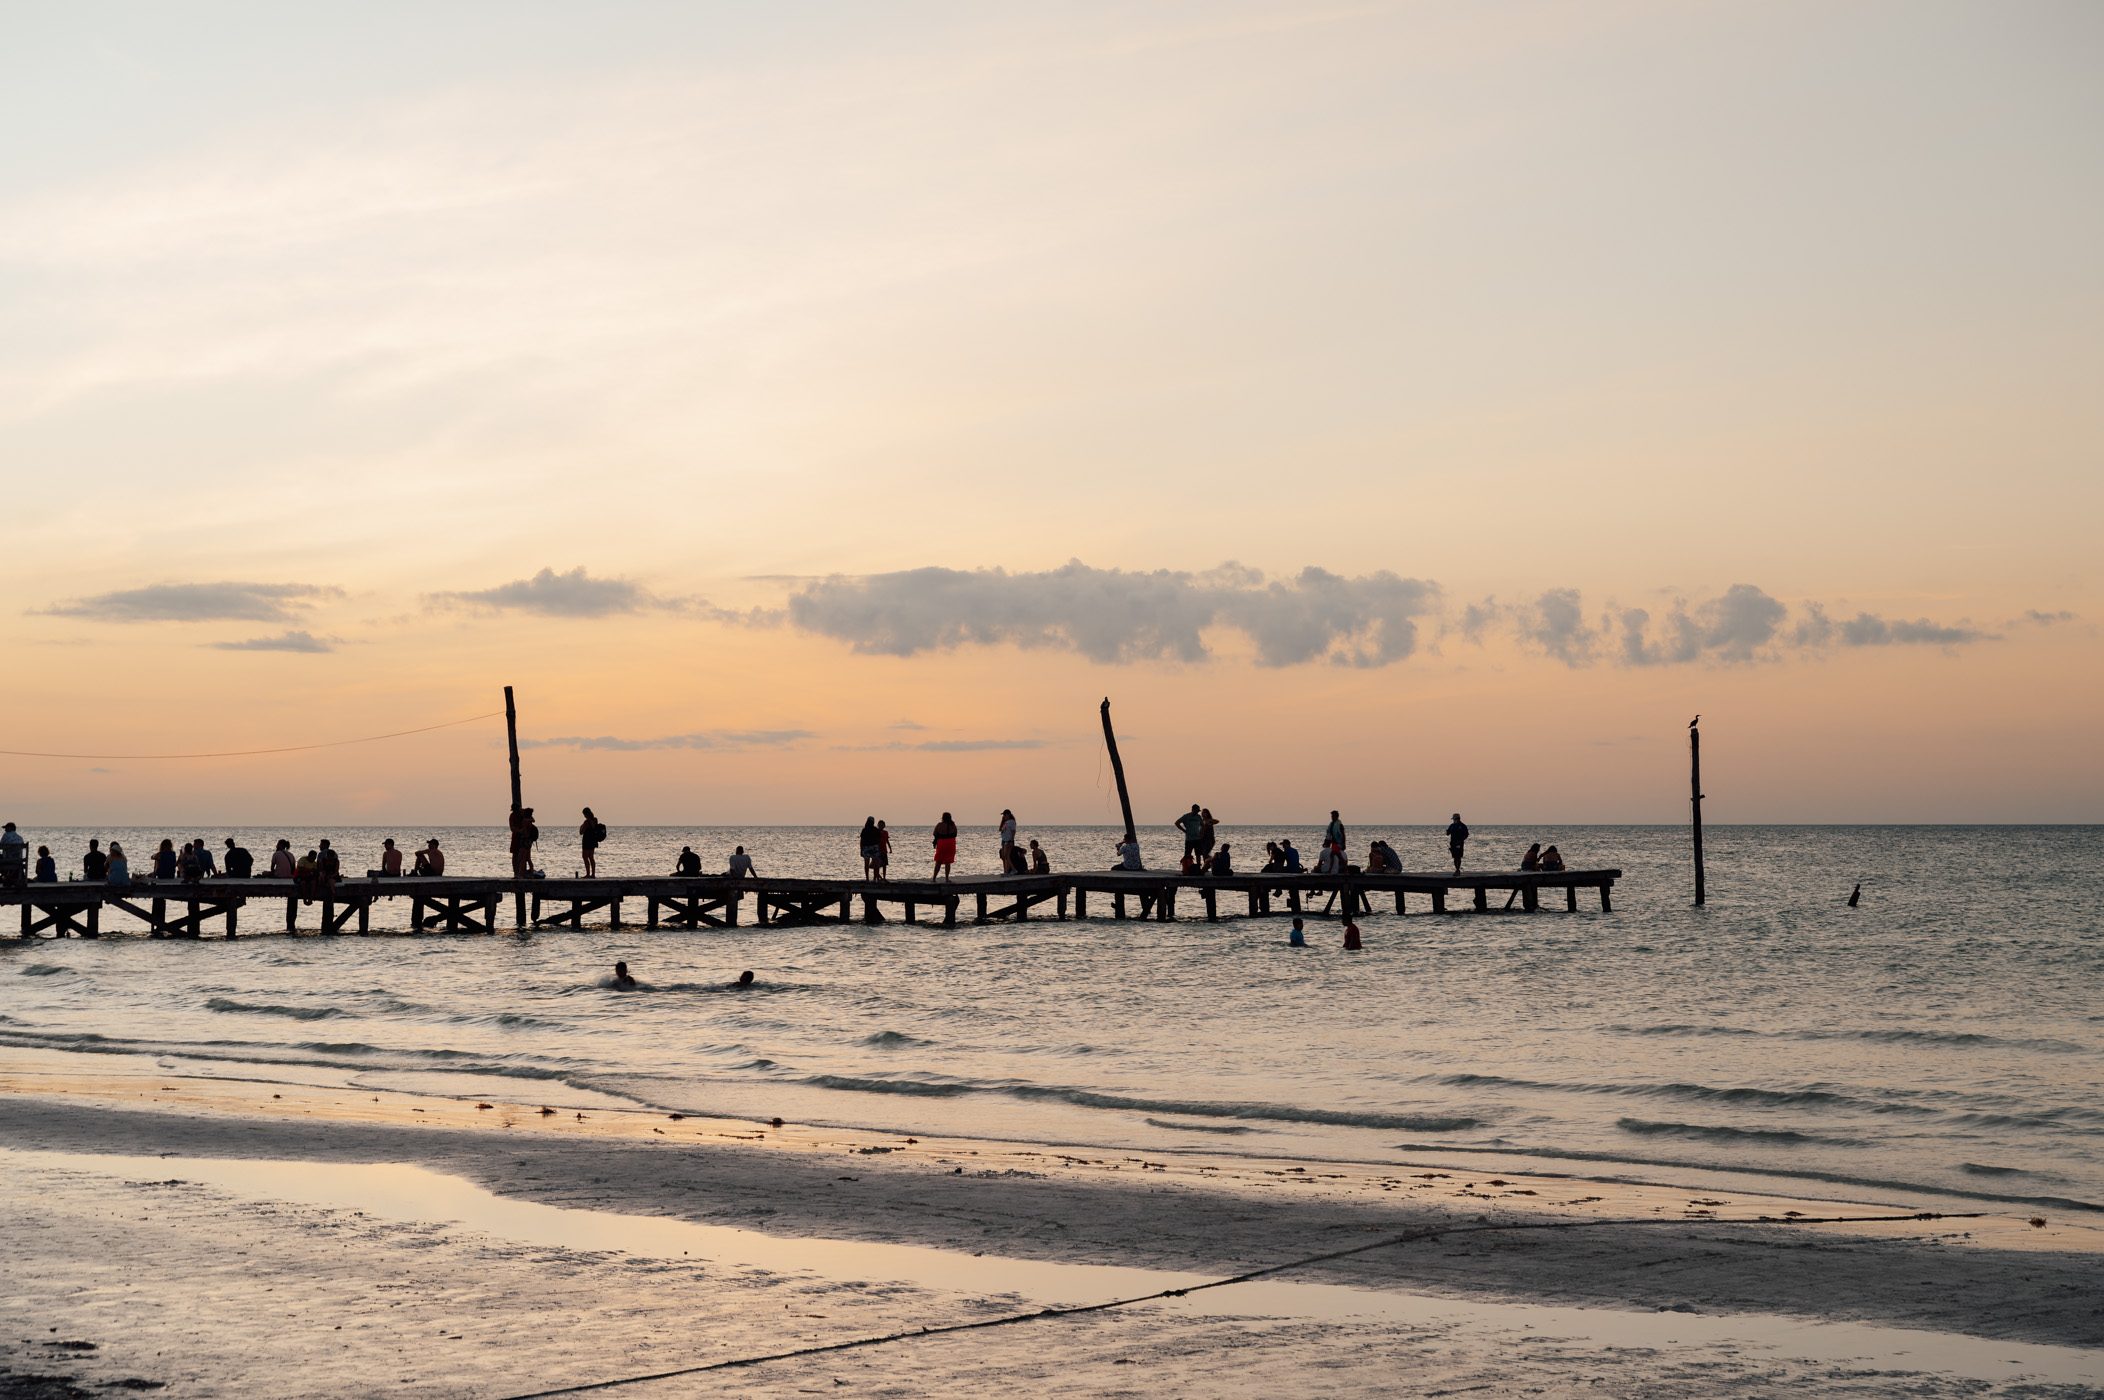 Sunset at the pier of Holbox island, Yucatán Mexico